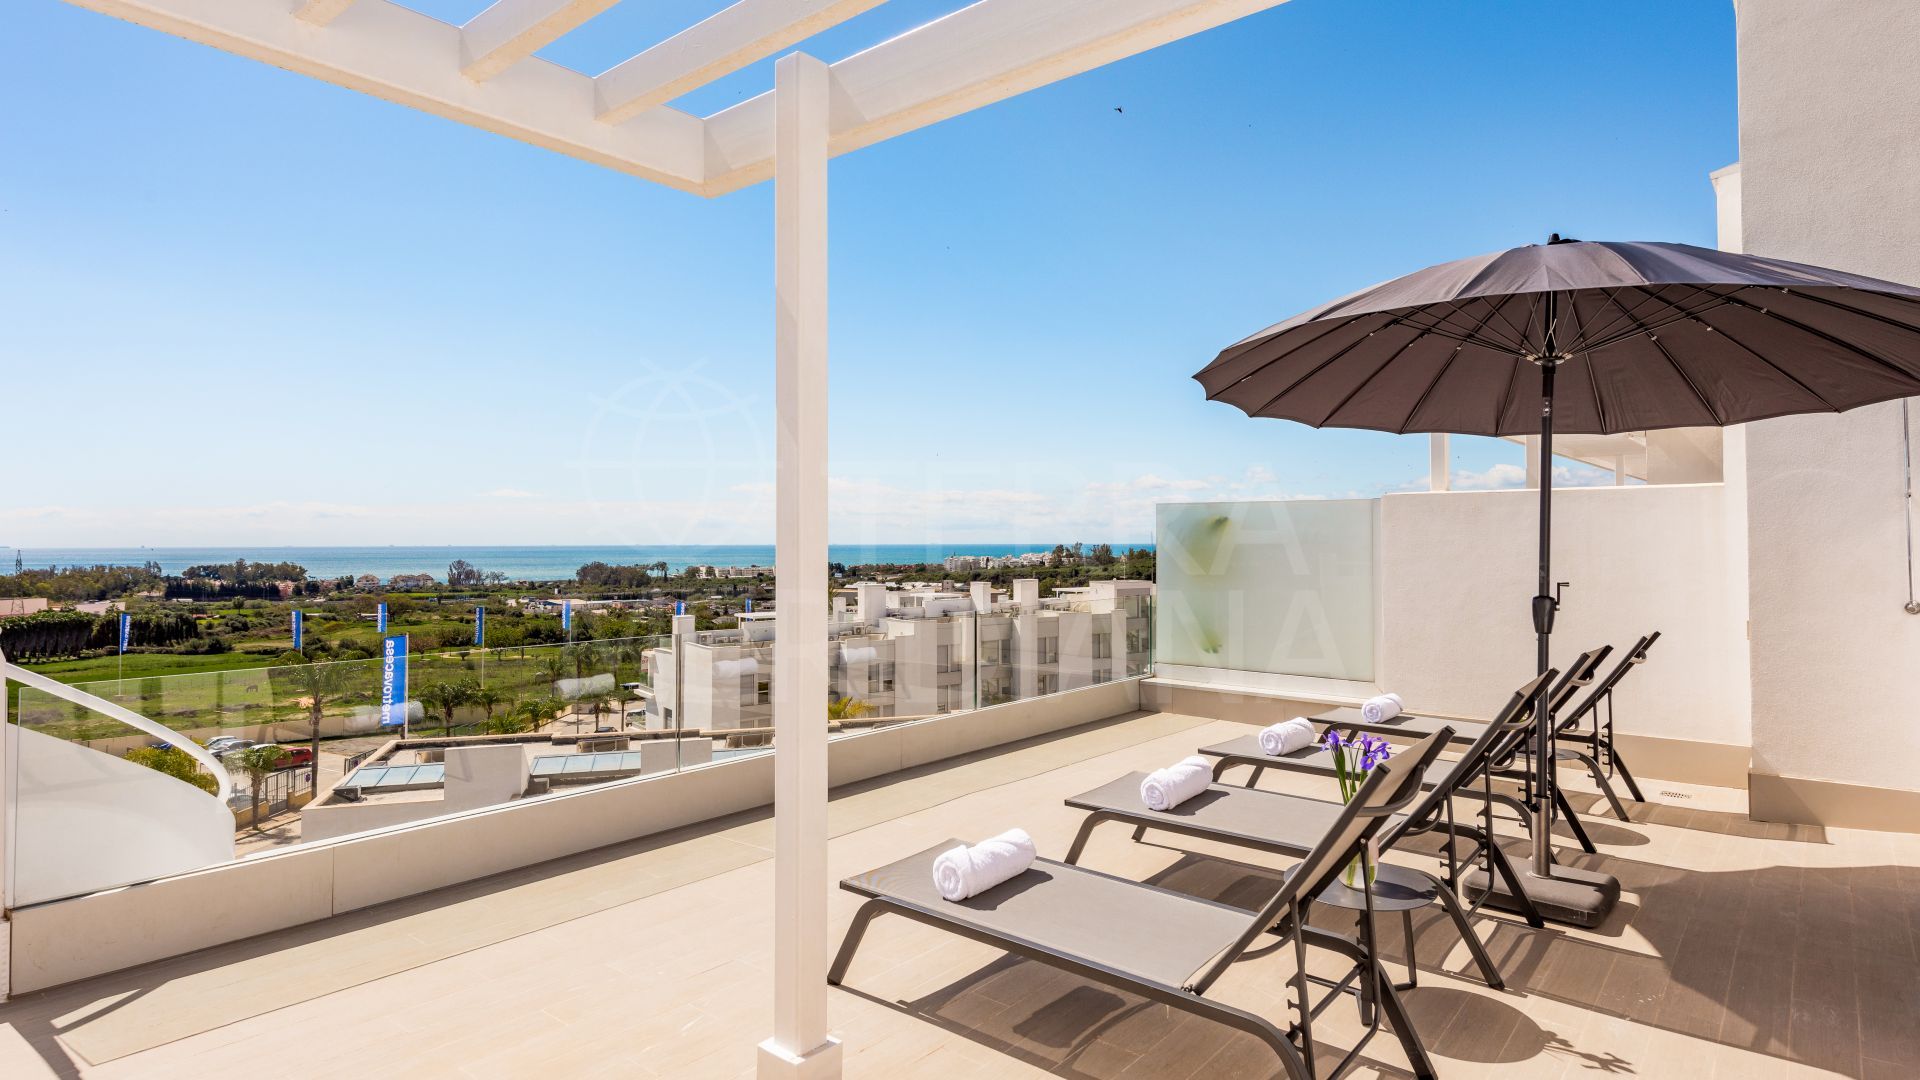 Elegant 2-Bed Duplex Penthouse with Spectacular Views for Sale in Le Mirage, Cancelada, Estepona